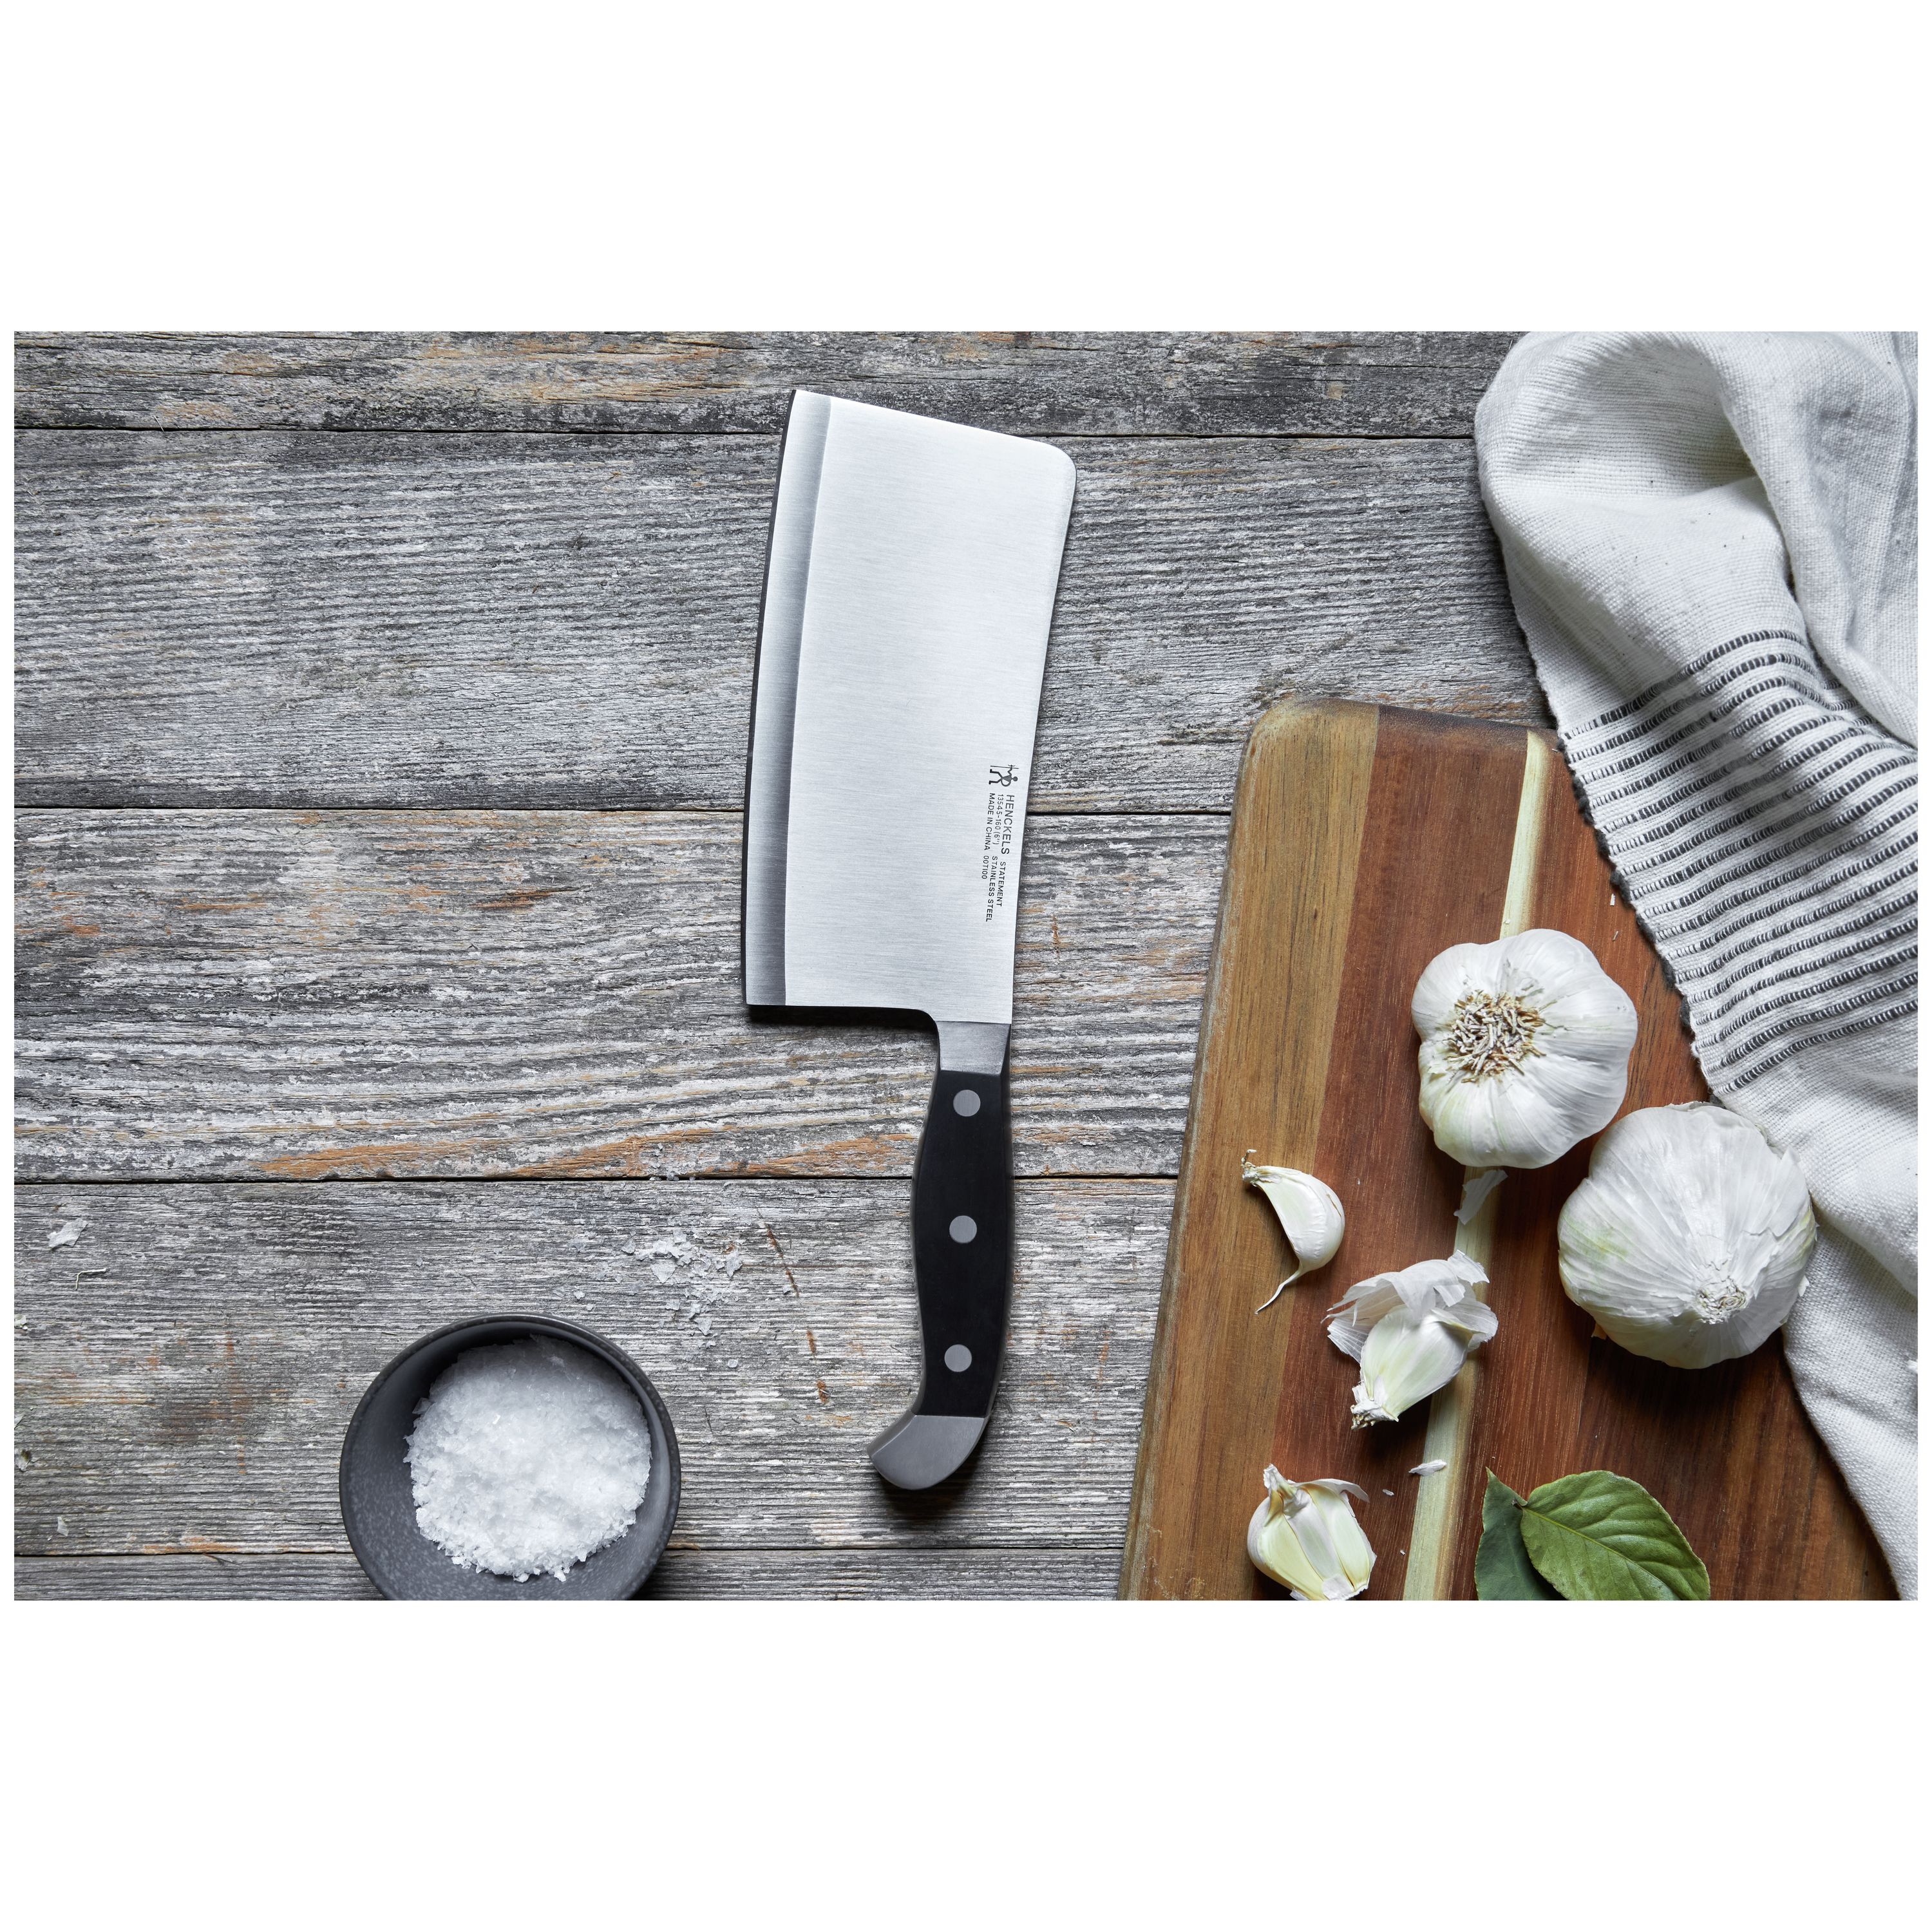  ZWILLING HENCKELS Classic Razor-Sharp 6-inch Meat Cleaver  Knife, German Engineered Informed by 100+ Years of Mastery, Black/Stainless  Steel : Home & Kitchen